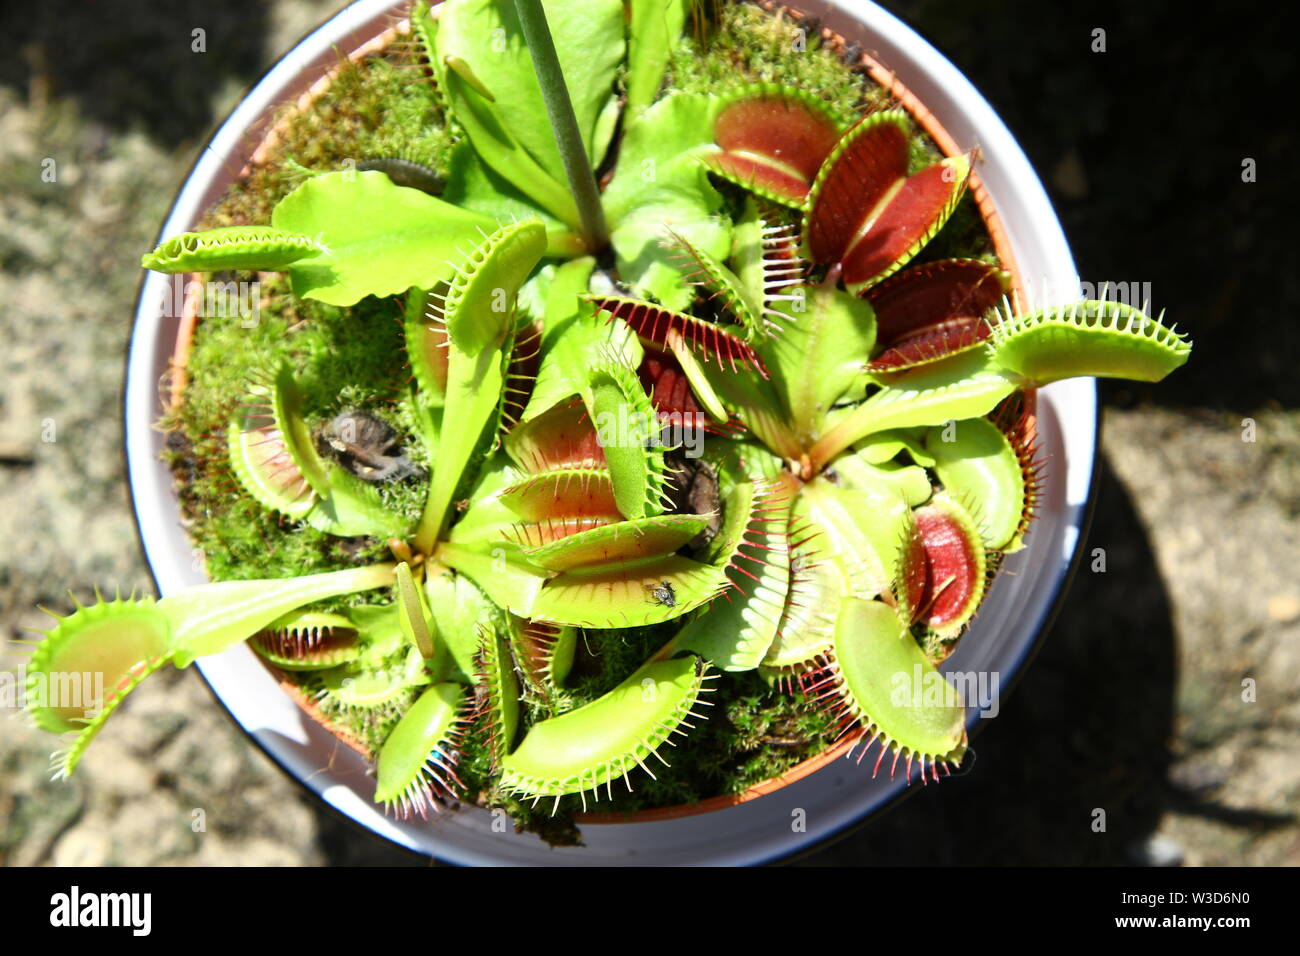 VENUS FLY TRAP PLANT. THE VENUS FLY TRAP PLANT IS A CARNIVEROUS PLANT NATIVE TO NORTH AND SOUTH CAROLINA STATES OF THE UNITED STATES OF AMERICA. WETLAND ENVIRONMENT PREFERENCE. IT'S PREY IS CHIEFLY INSECTS AND ARACHNIDS. TRIGGER SENSITIVE HAIRS AT THE END OF AND INSIDE THE LEAVES CAN BE SEEN IN THIS IMAGE. CLOSED LEAF UPON A HOUSE FLY AT CENTRE OF IMAGE. SUB TROPICAL . Stock Photo